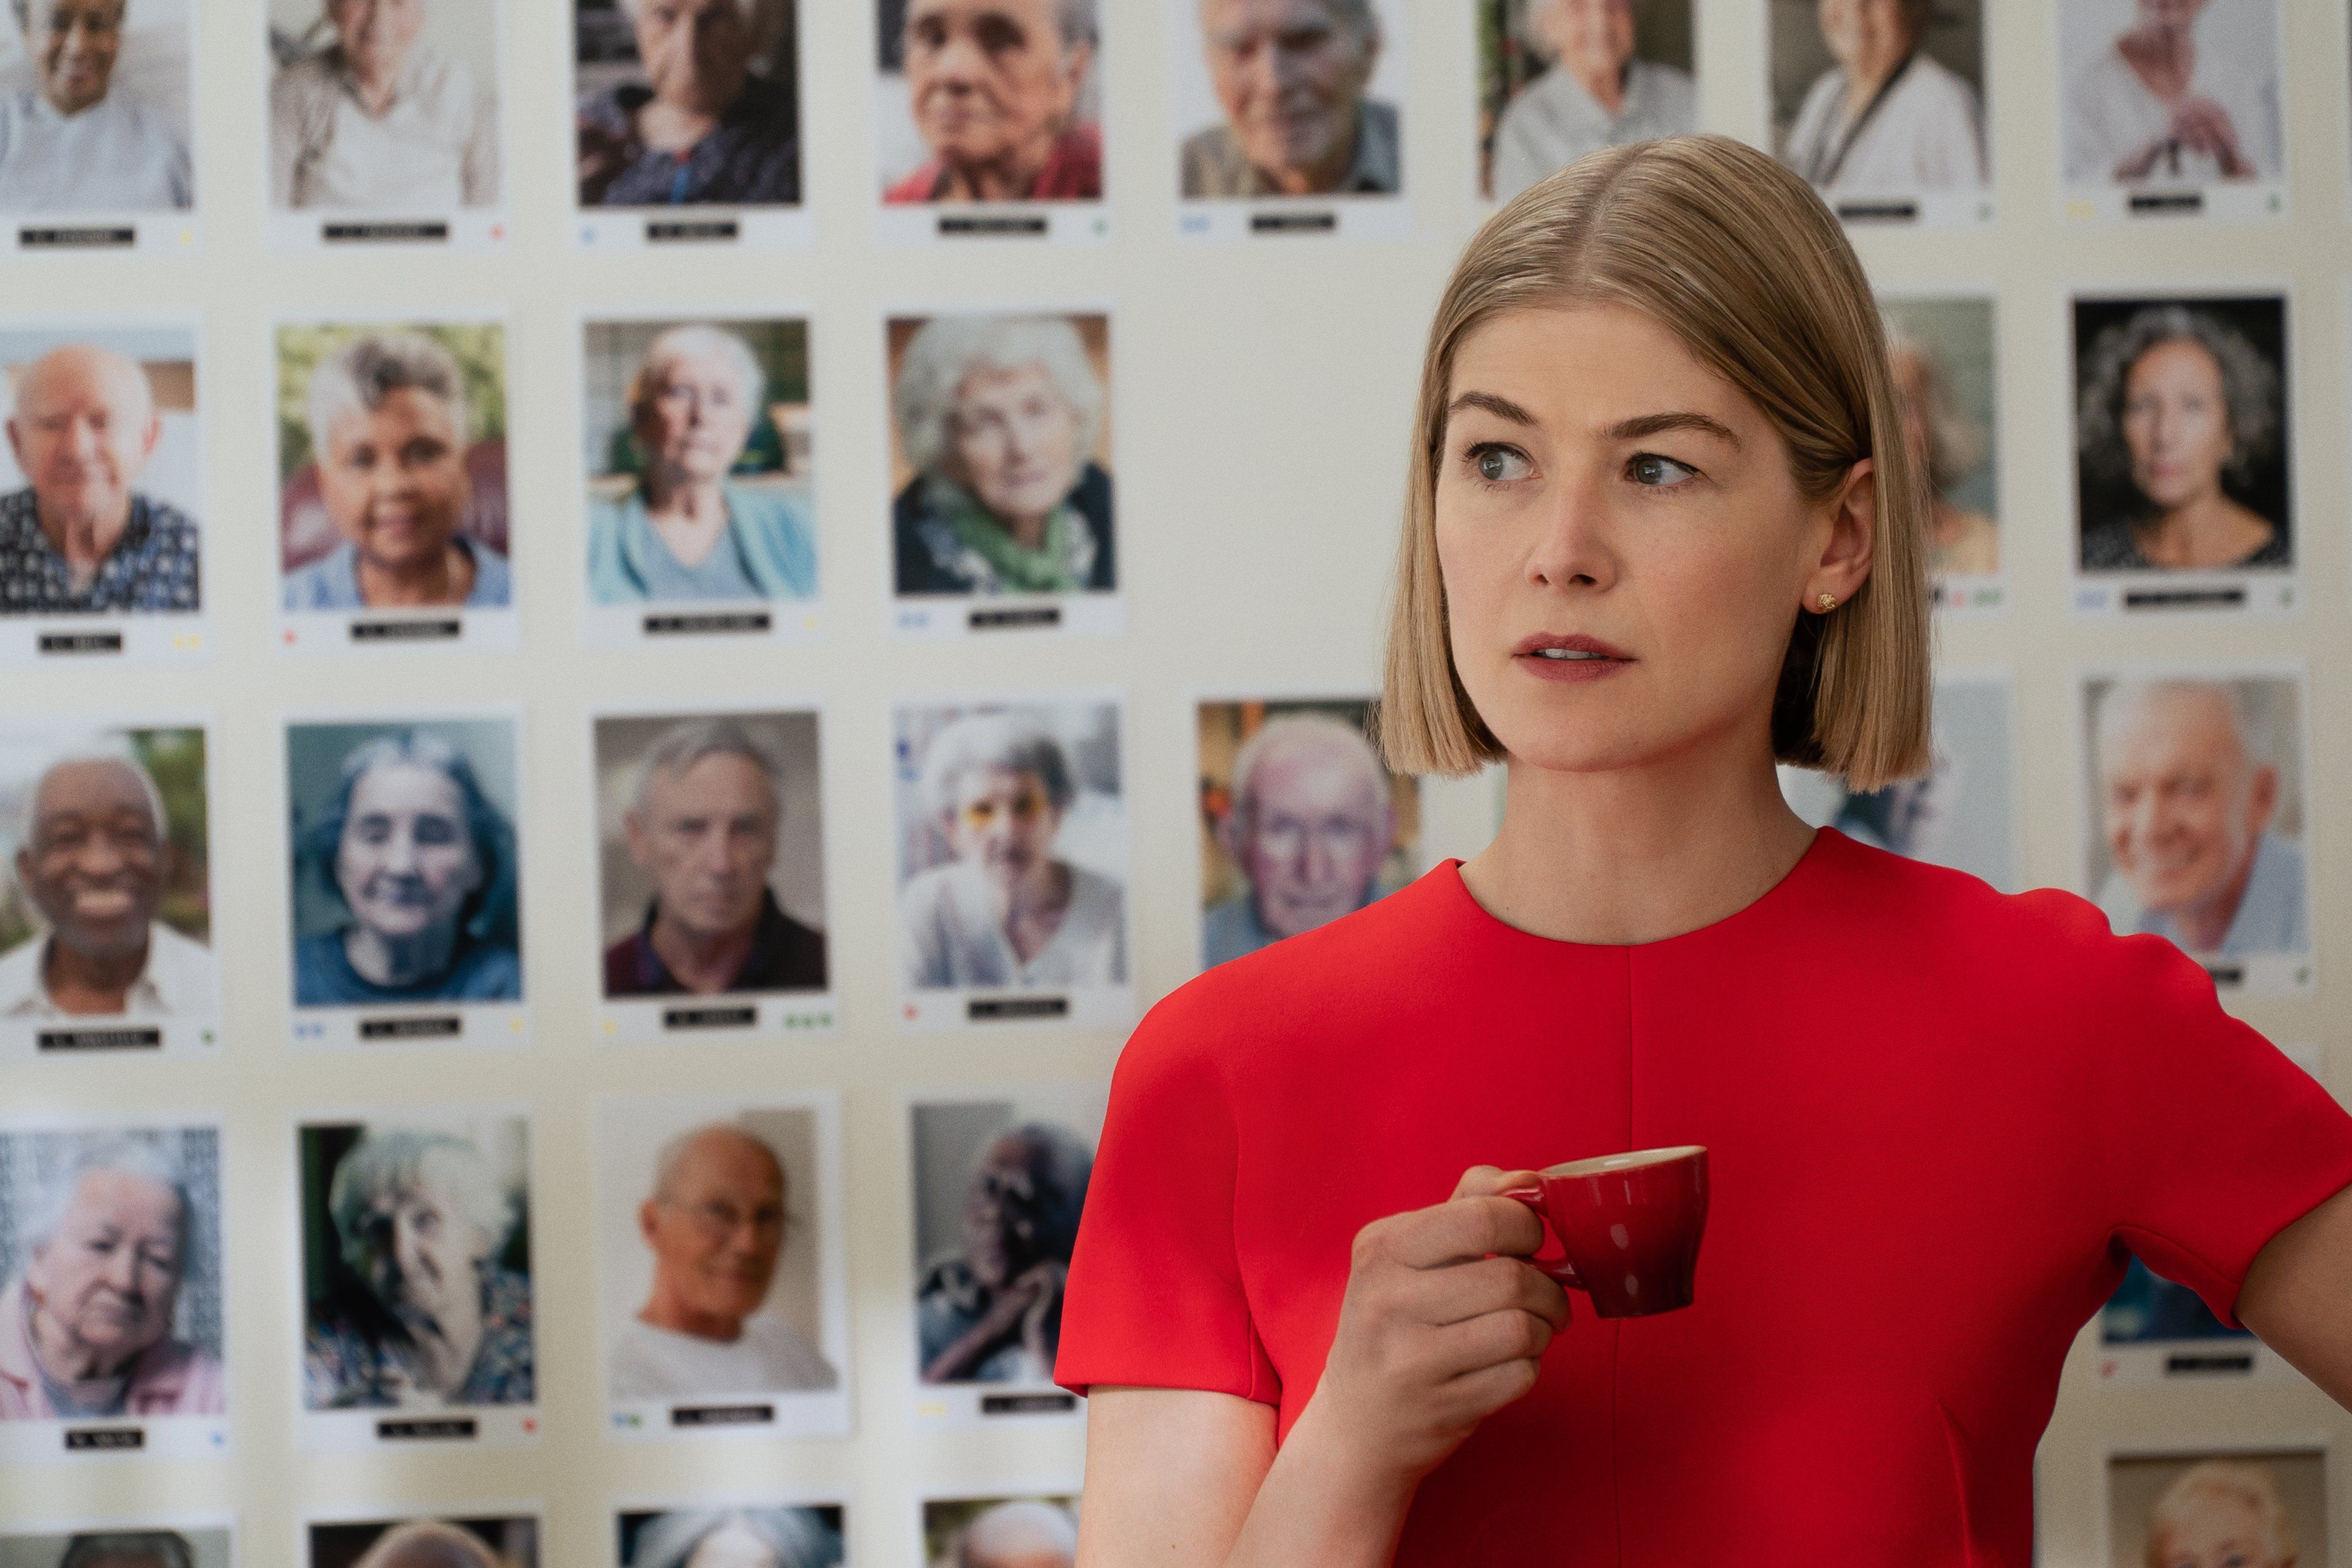 I Care A Lot review - is Rosamund Pike's new movie worth seeing?